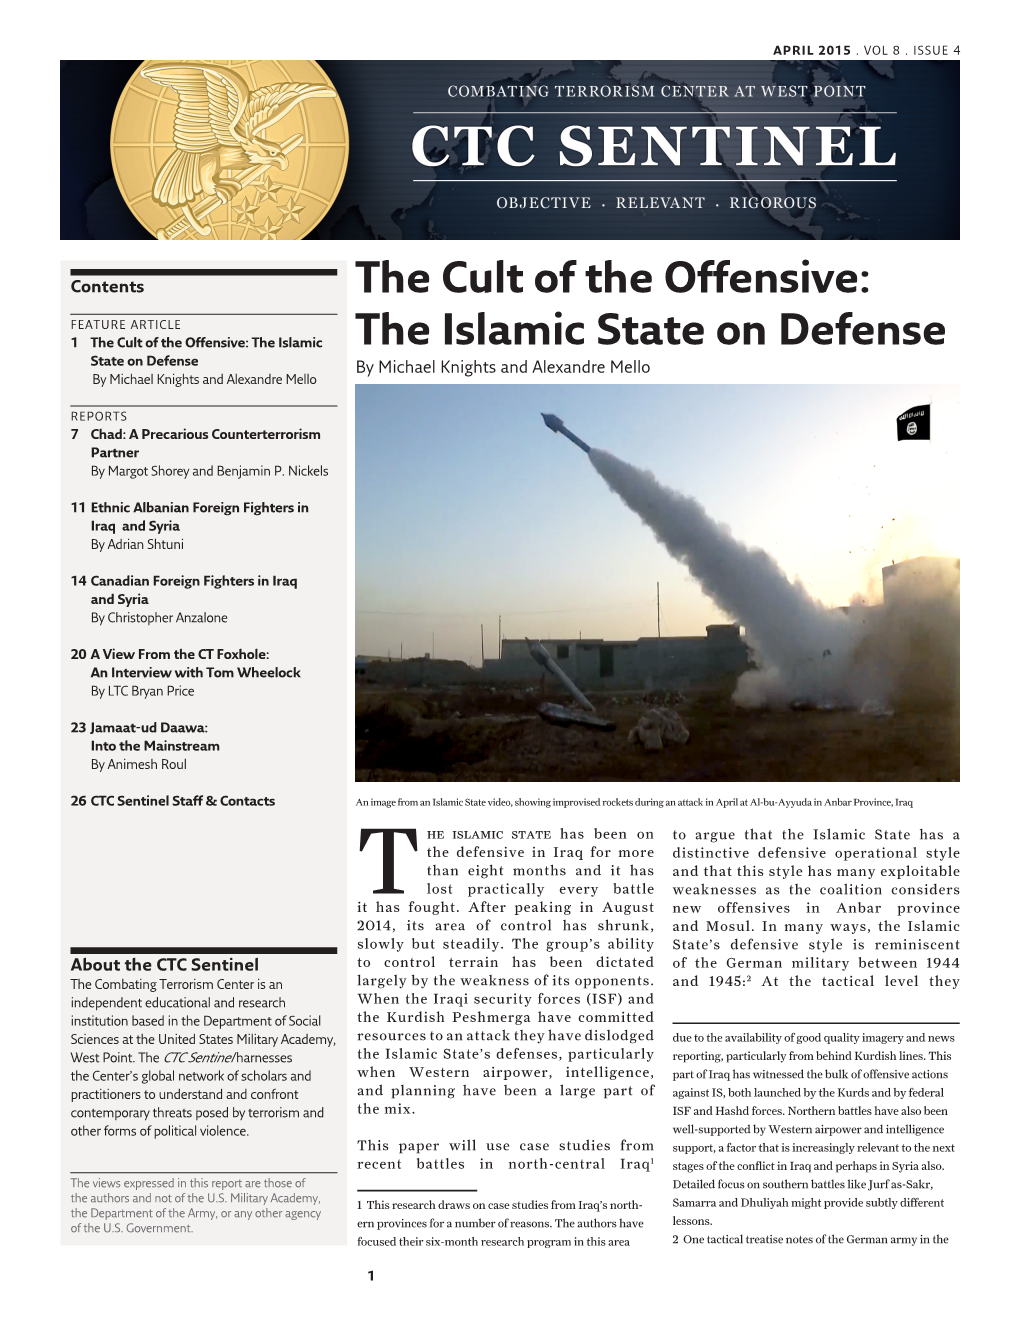 The Islamic State on Defense State on Defense by Michael Knights and Alexandre Mello by Michael Knights and Alexandre Mello